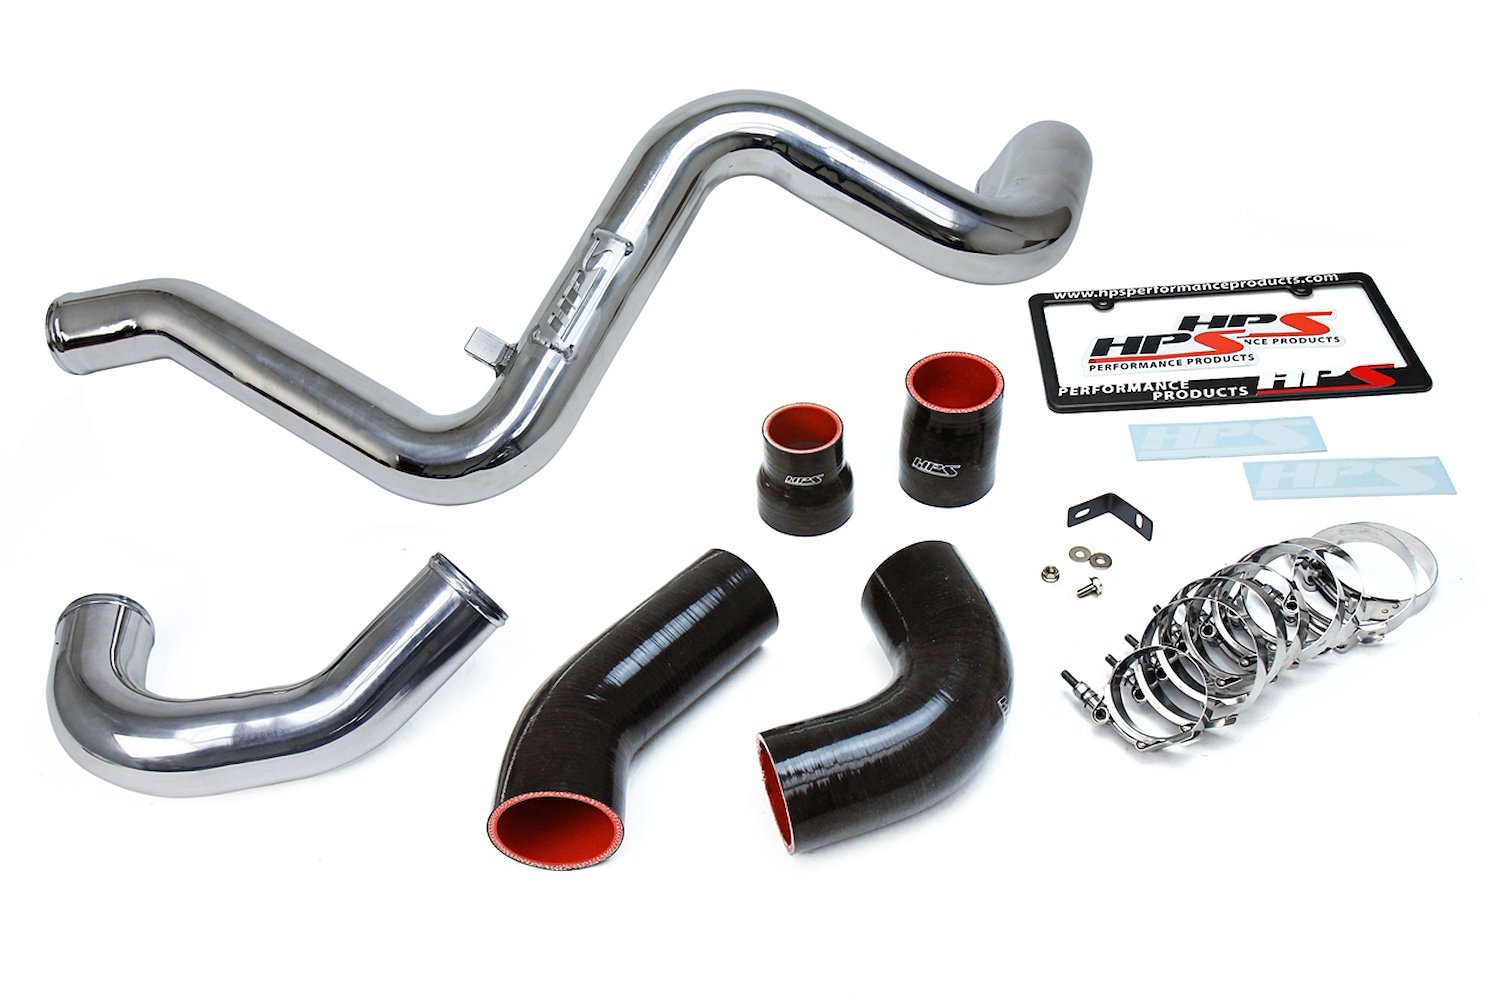 17-104P Turbo Charge Pipe Kit, Replace Stock Charge Pipe, Improve Throttle Response, Reduce Turbo Lag